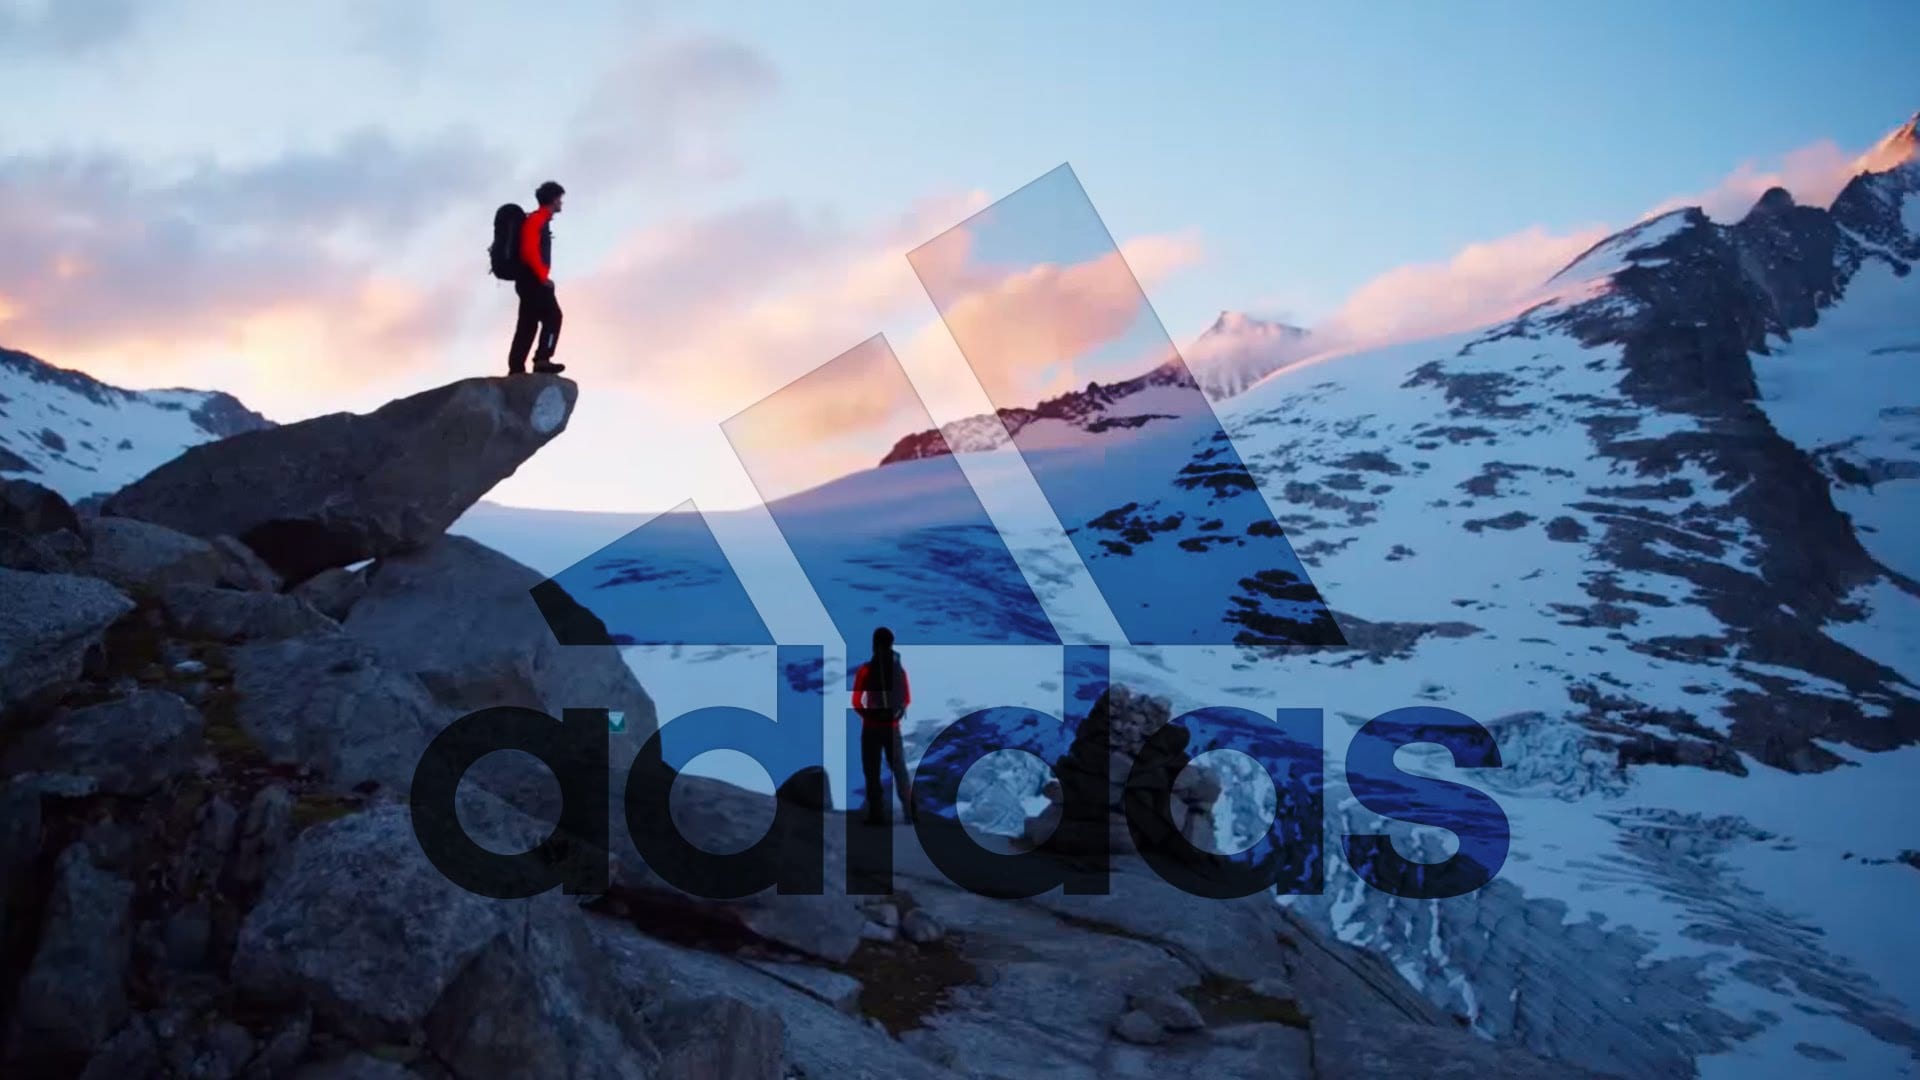 Adidas Terrex Mountain Project-The Hike